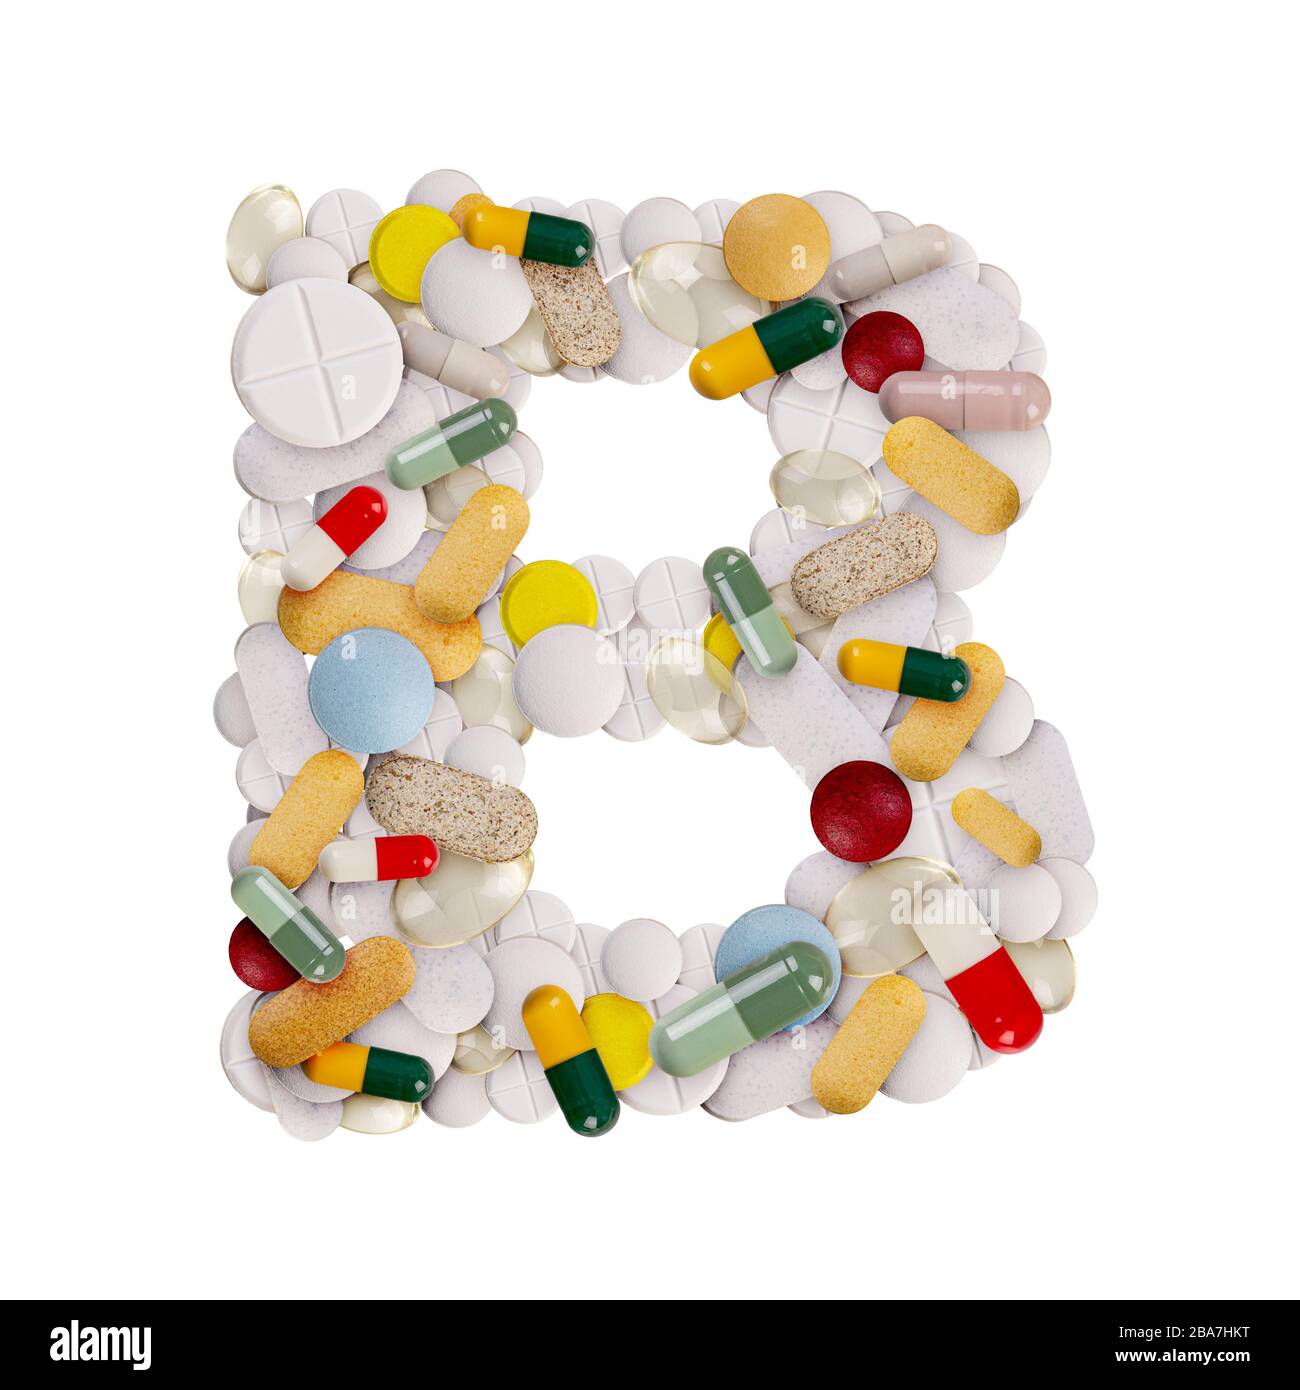 Capital letter B made of various colorful pills, capsules and tablets on isolated white background Stock Photo